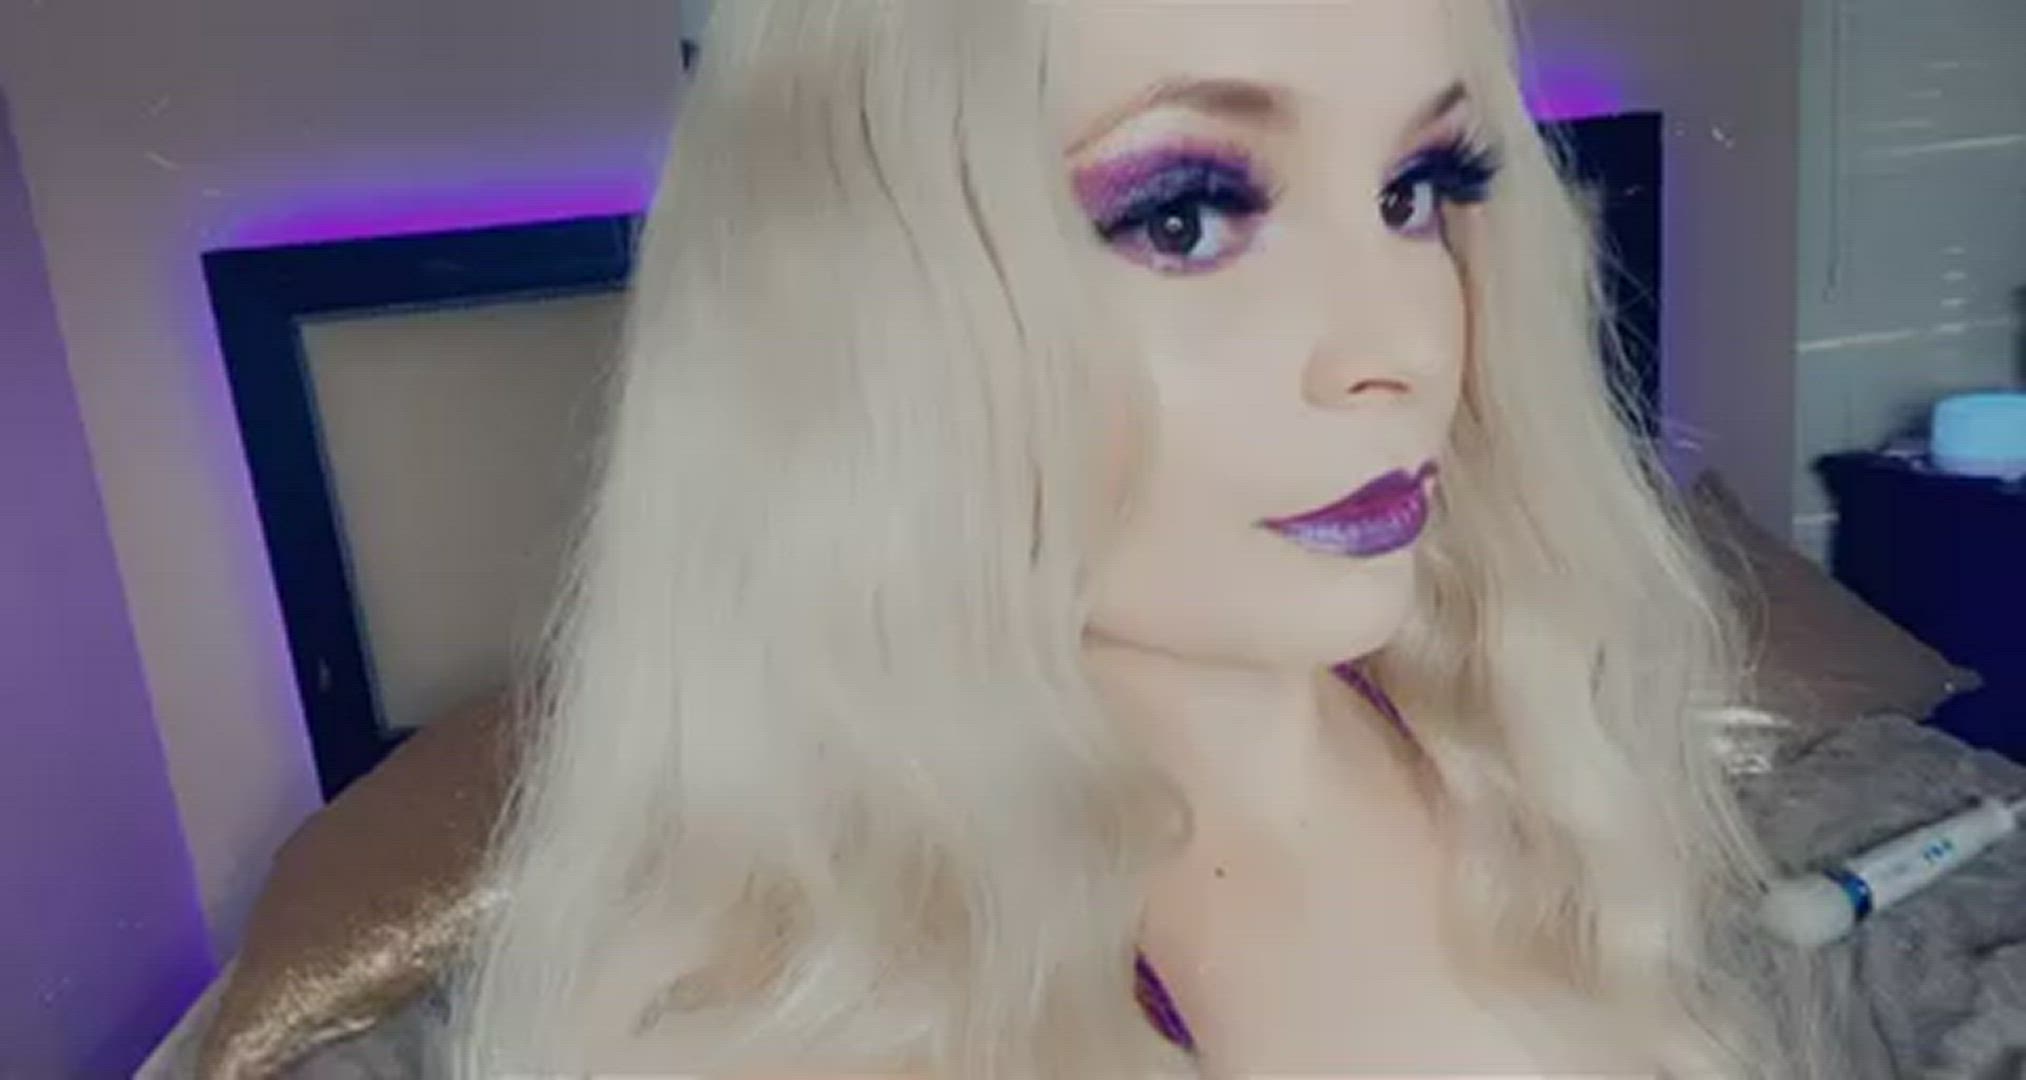 Camgirl porn video with onlyfans model lanabackwards <strong>@lana_backwards</strong>